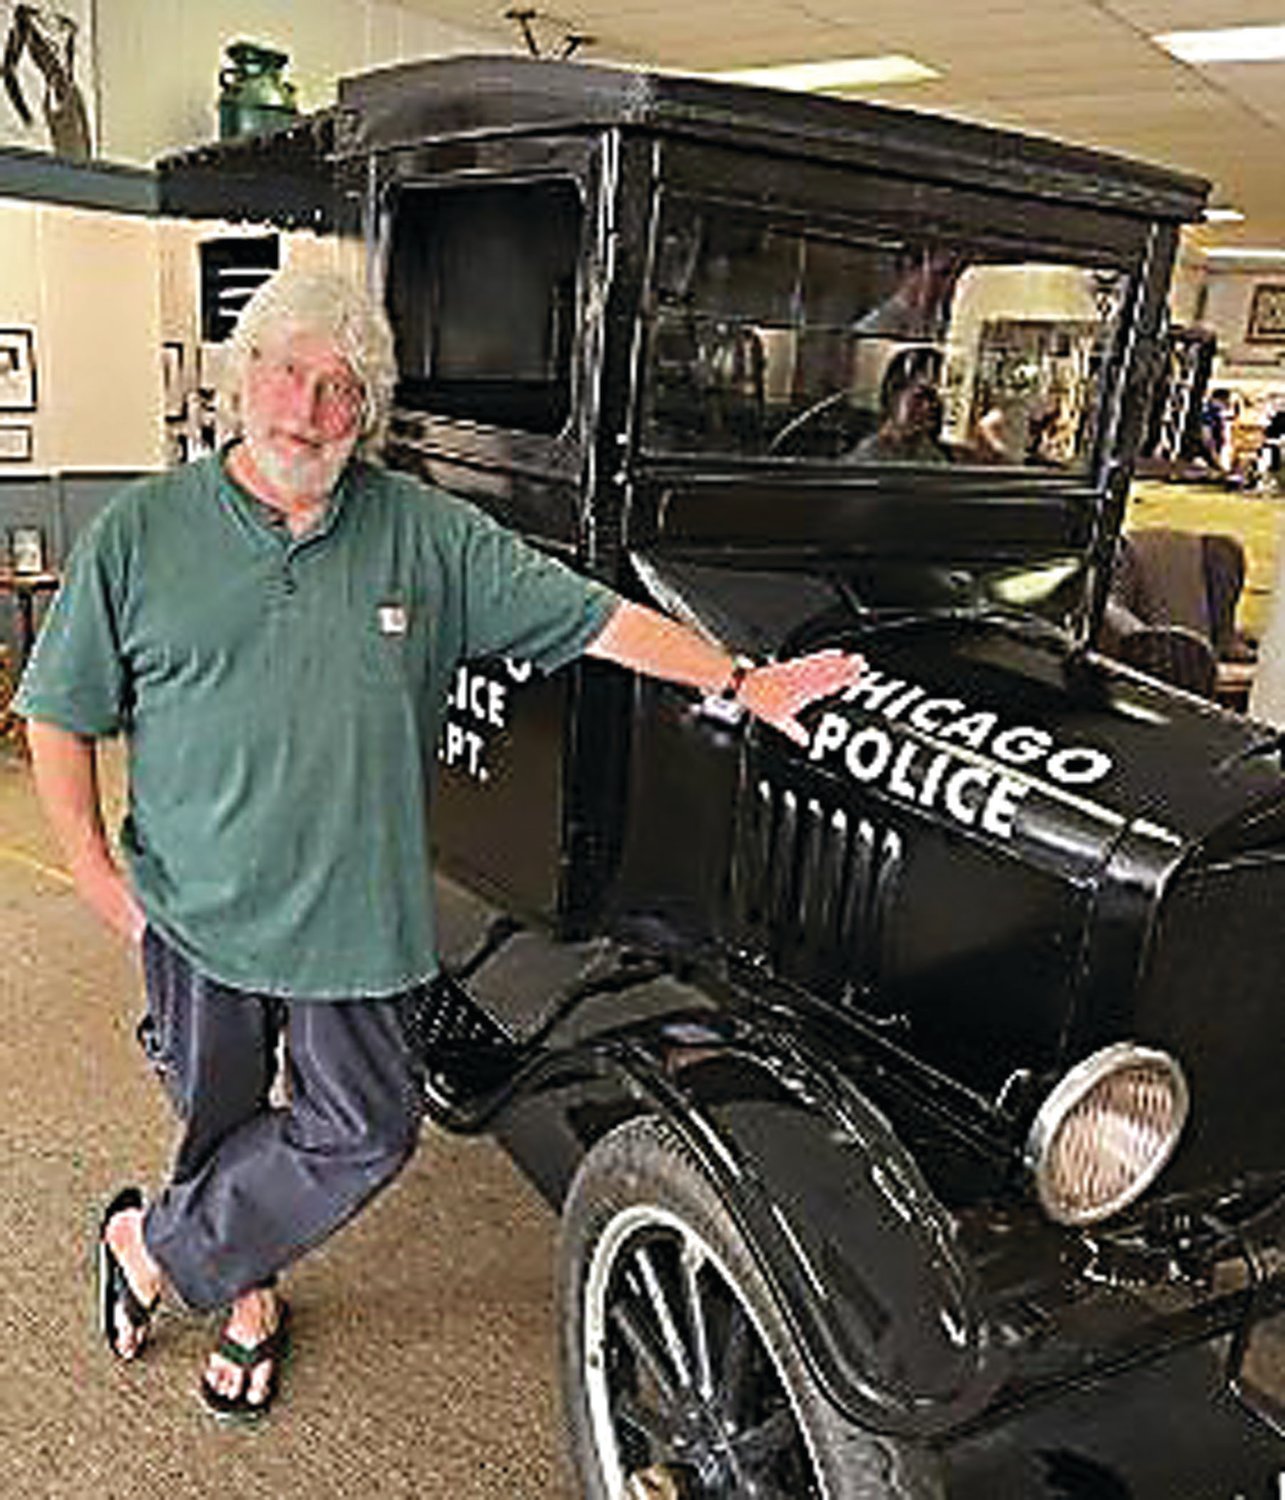 Stephen Green, president and CEO of the Eliot Ness Museum, and a re-imagined Chicago paddy wagon from the Prohibition Era.